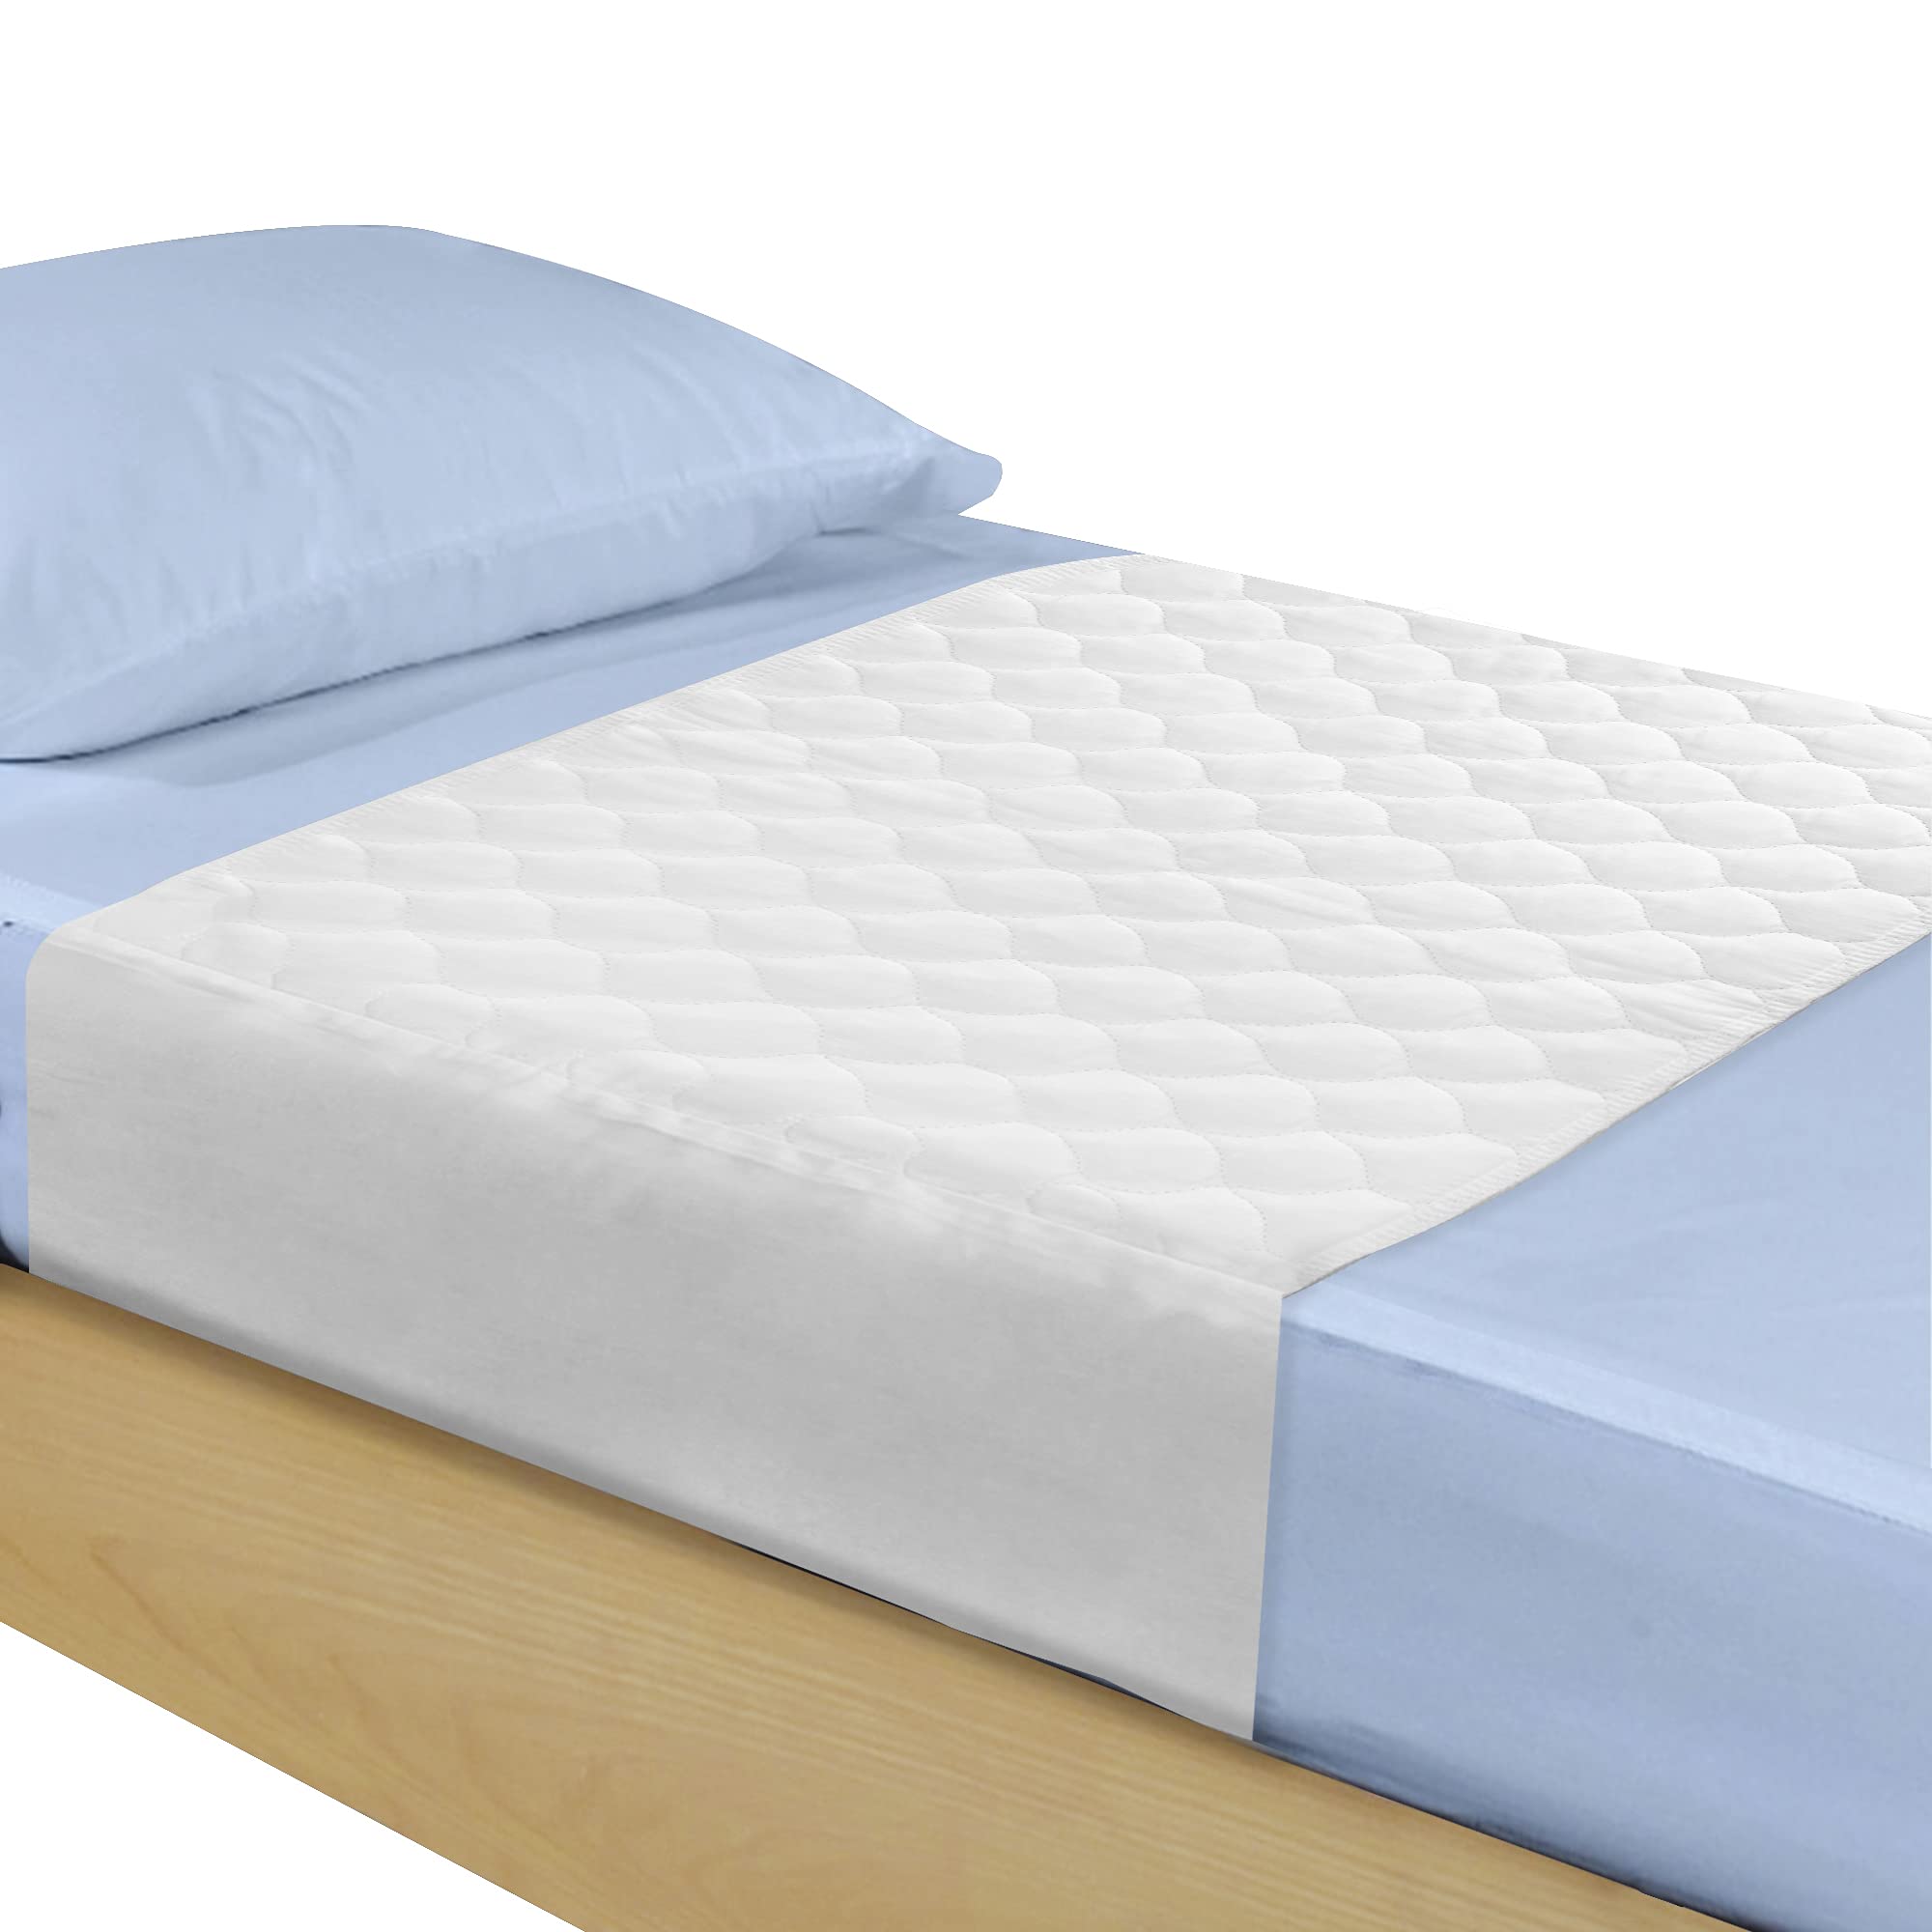 Nevlers 36 x 78 Non Slip Mattress Pad Twin XL | Heavy Duty PVC Bed Stoppers to Prevent Sliding | Multi-Use Trimmable Under Mattress Support Bed